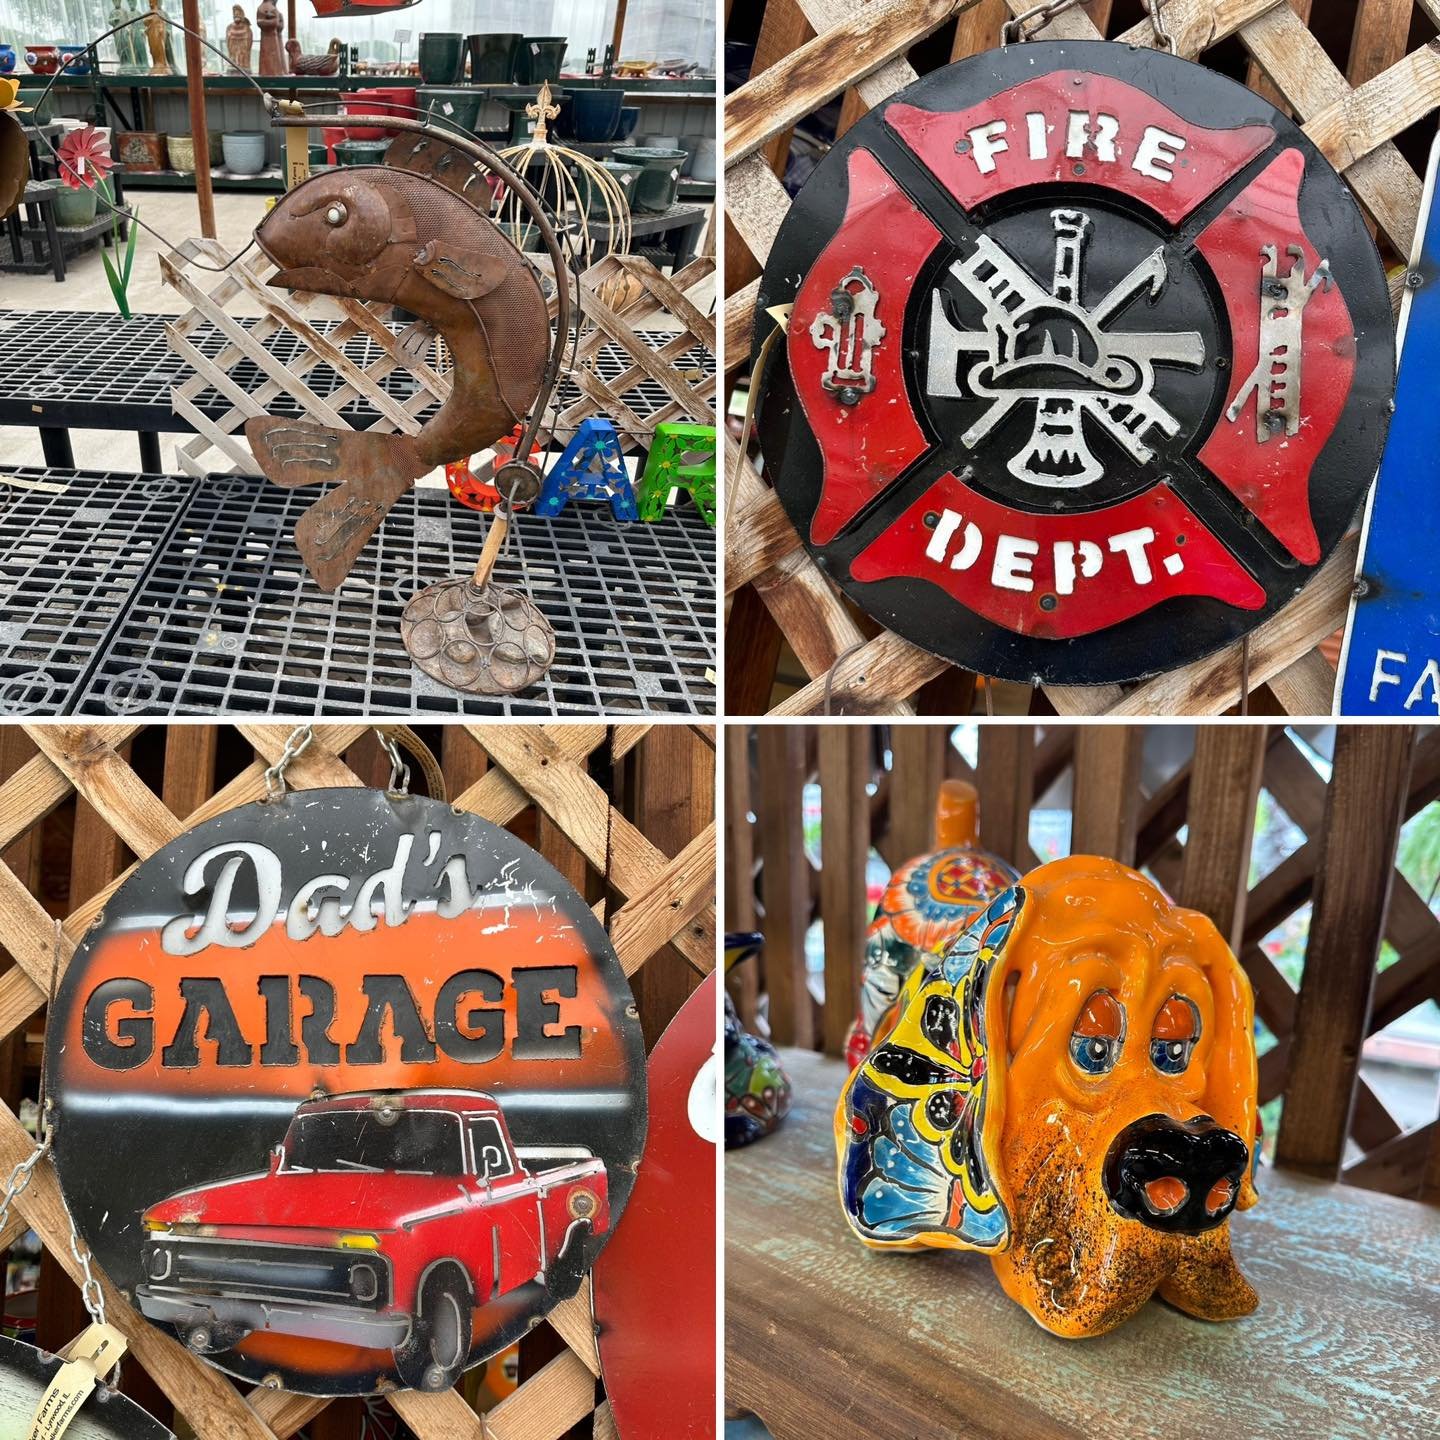 Father&rsquo;s Day is this weekend! We have great gifts for dad even if he isn&rsquo;t a gardener. All these metal and talavera pieces, along with our entire stock of Mexican pottery and garden art, is currently 20% off. All plants are 25-40% off as 